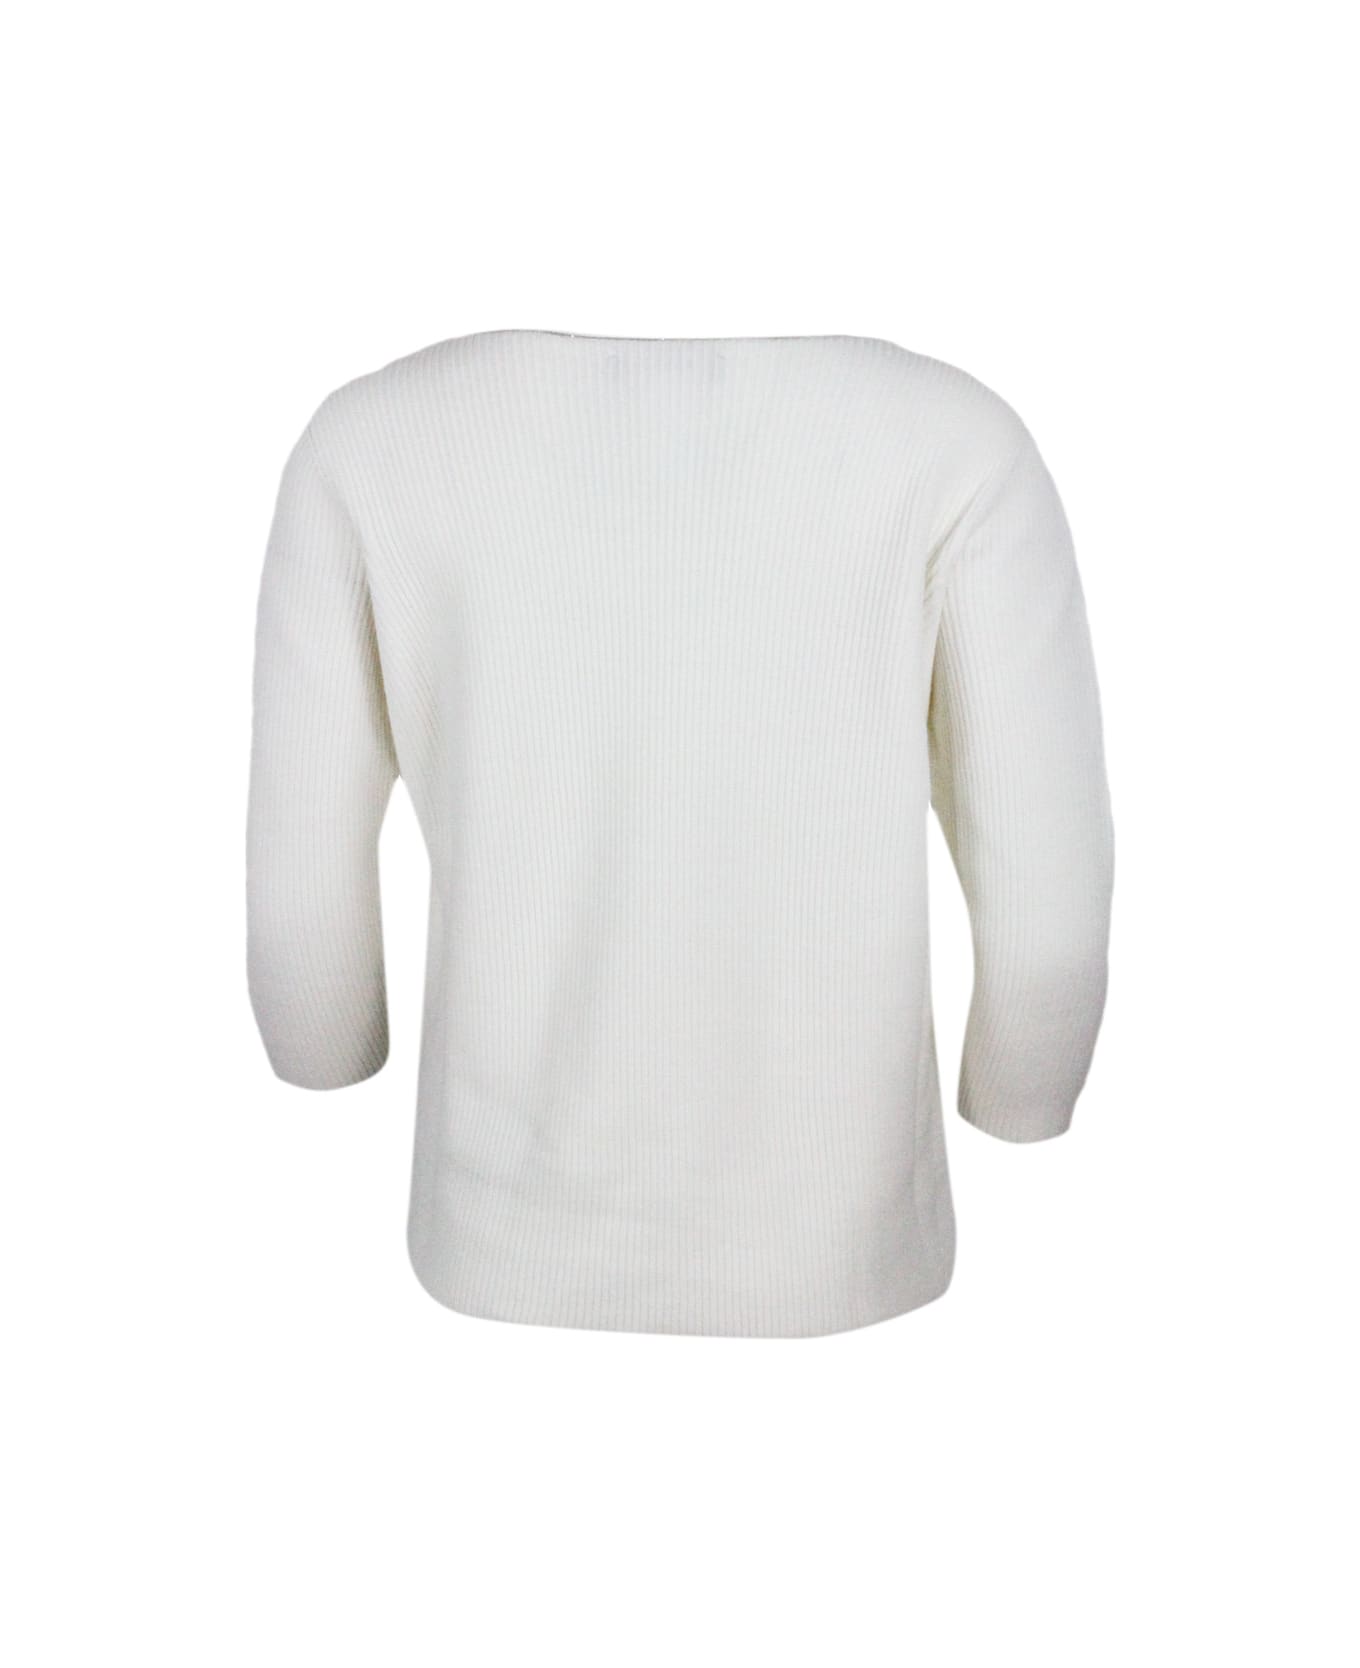 Fabiana Filippi Long-sleeved Boat-neck Sweater In Wool And Cotton Embellished With Brilliant Monili On The Neck - White